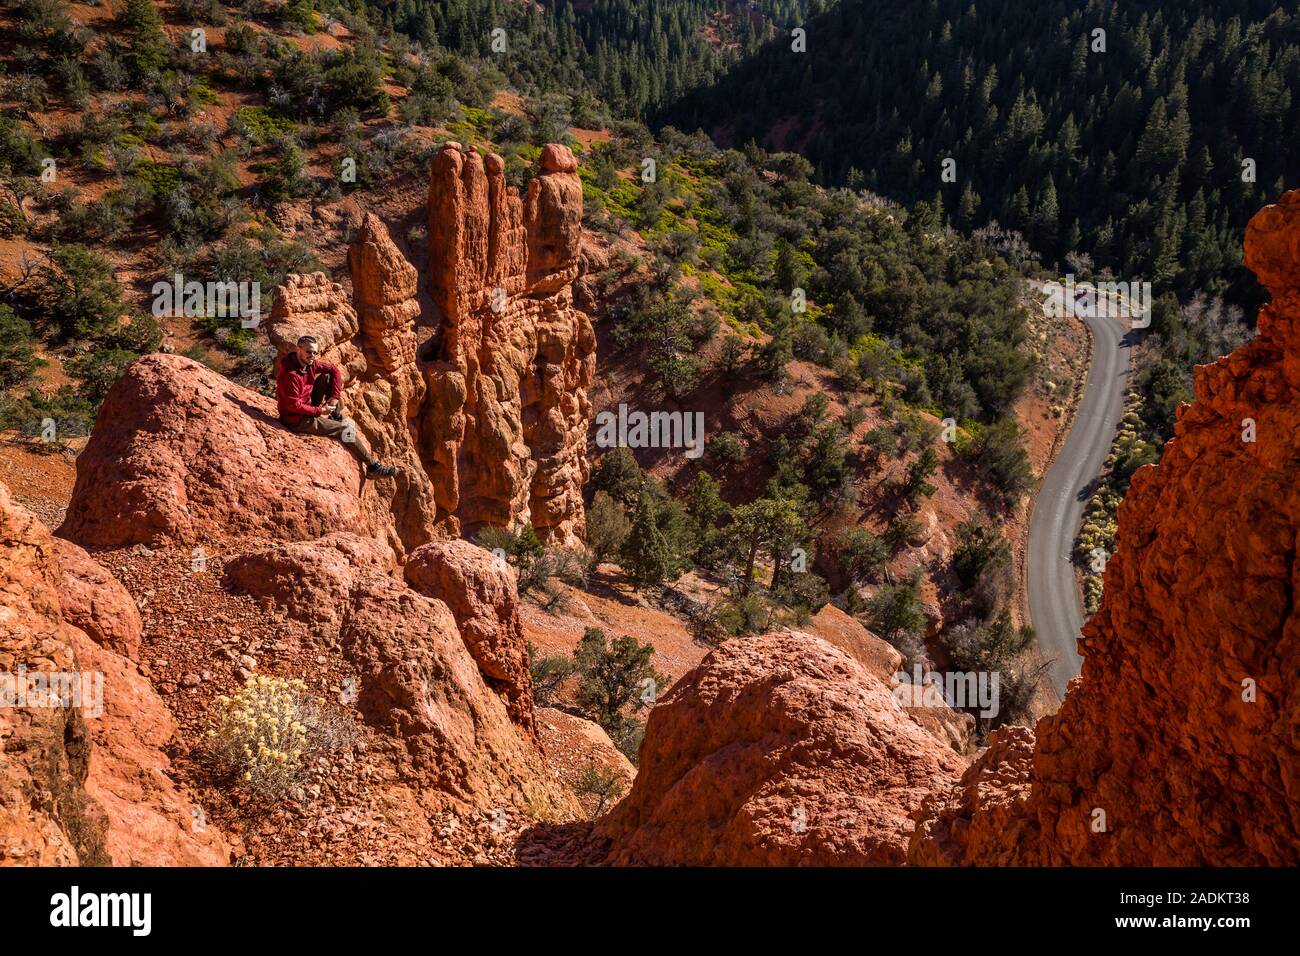 Man looking toward the camera resting atop red rock formations in Southern Utah canyon near Cedar City. Stock Photo